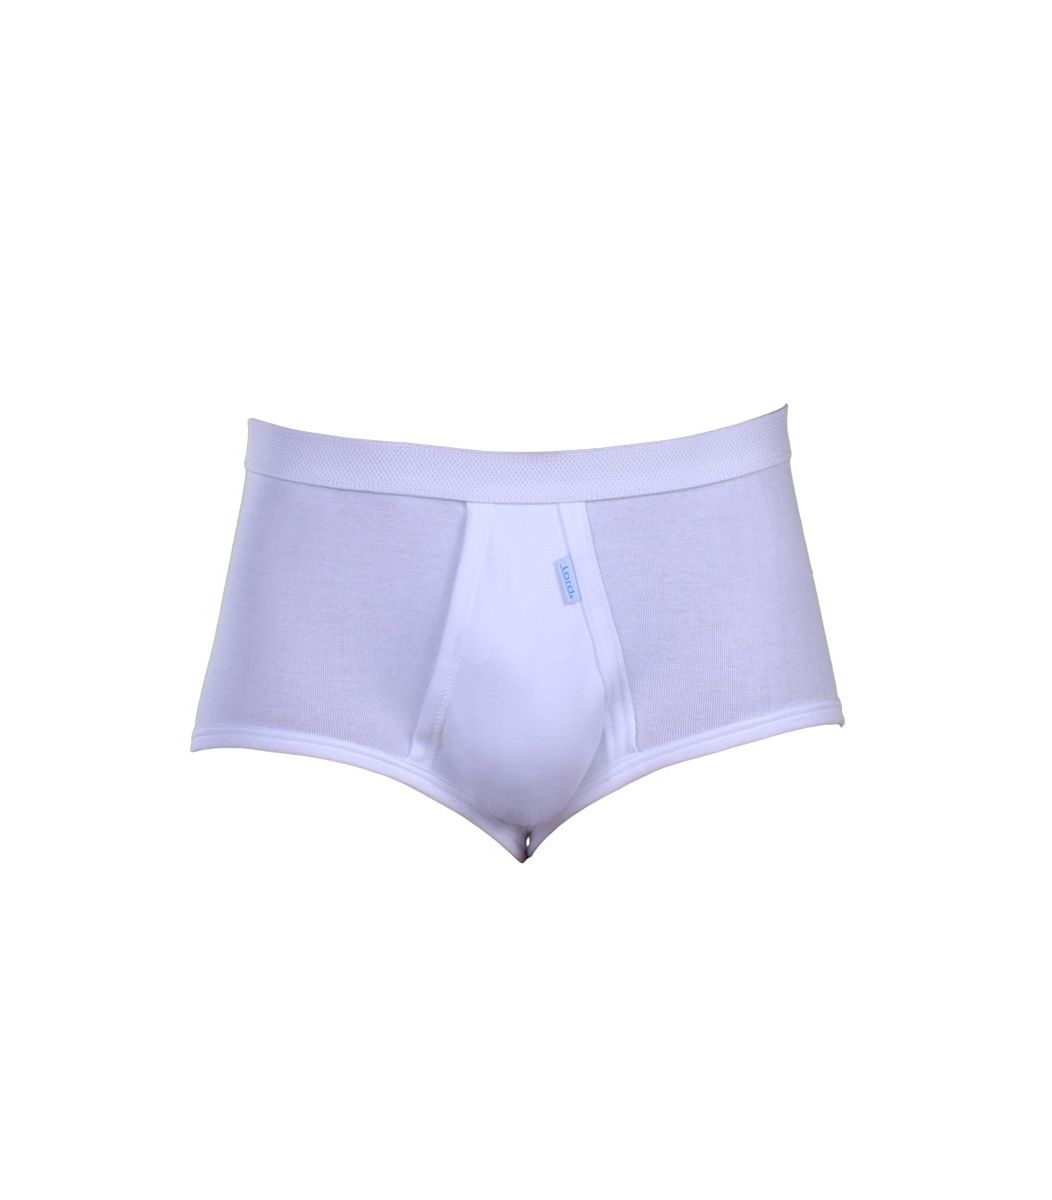 Boys Brief, side opening